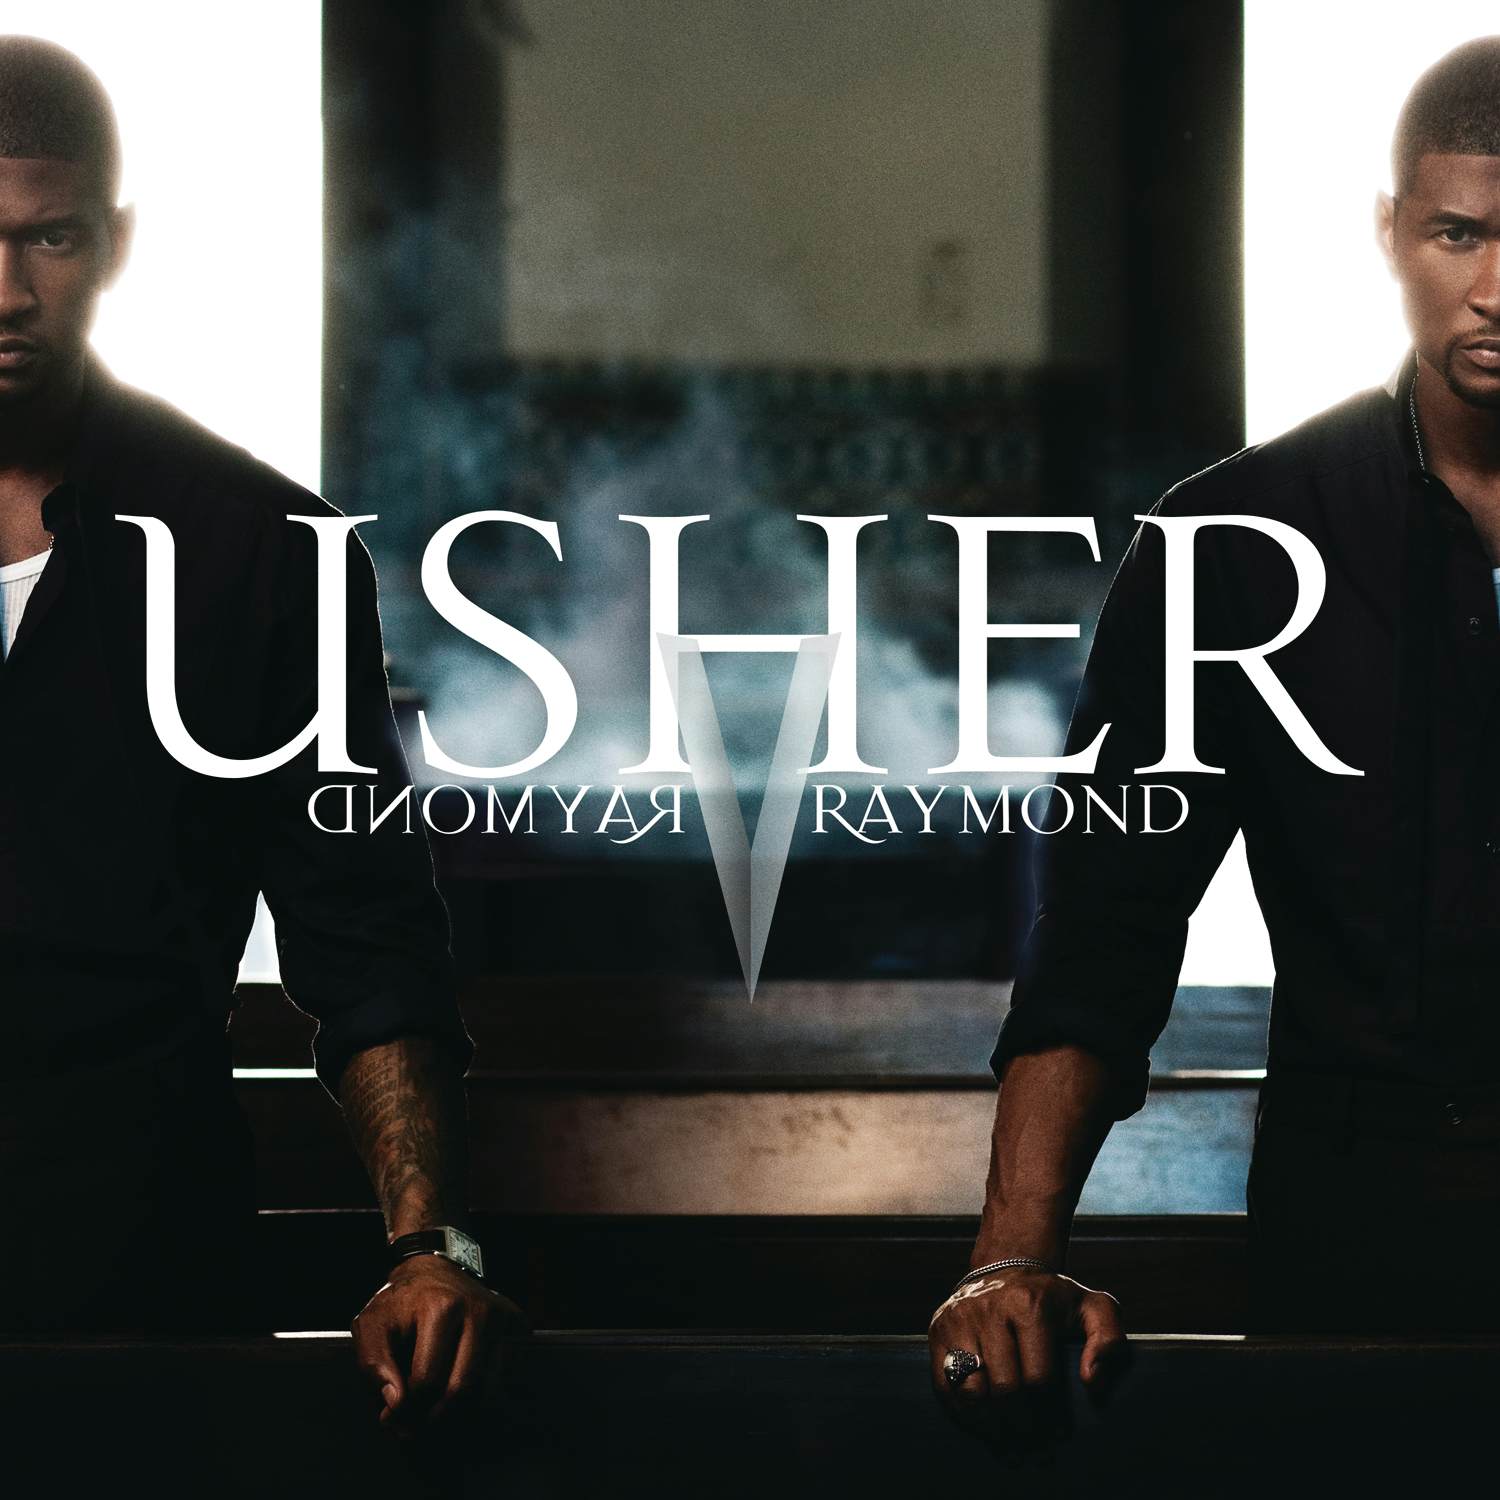 Usher Raymond. Usher Raymond v. Raymond. Usher album. OMG Usher feat. Will.i.am.